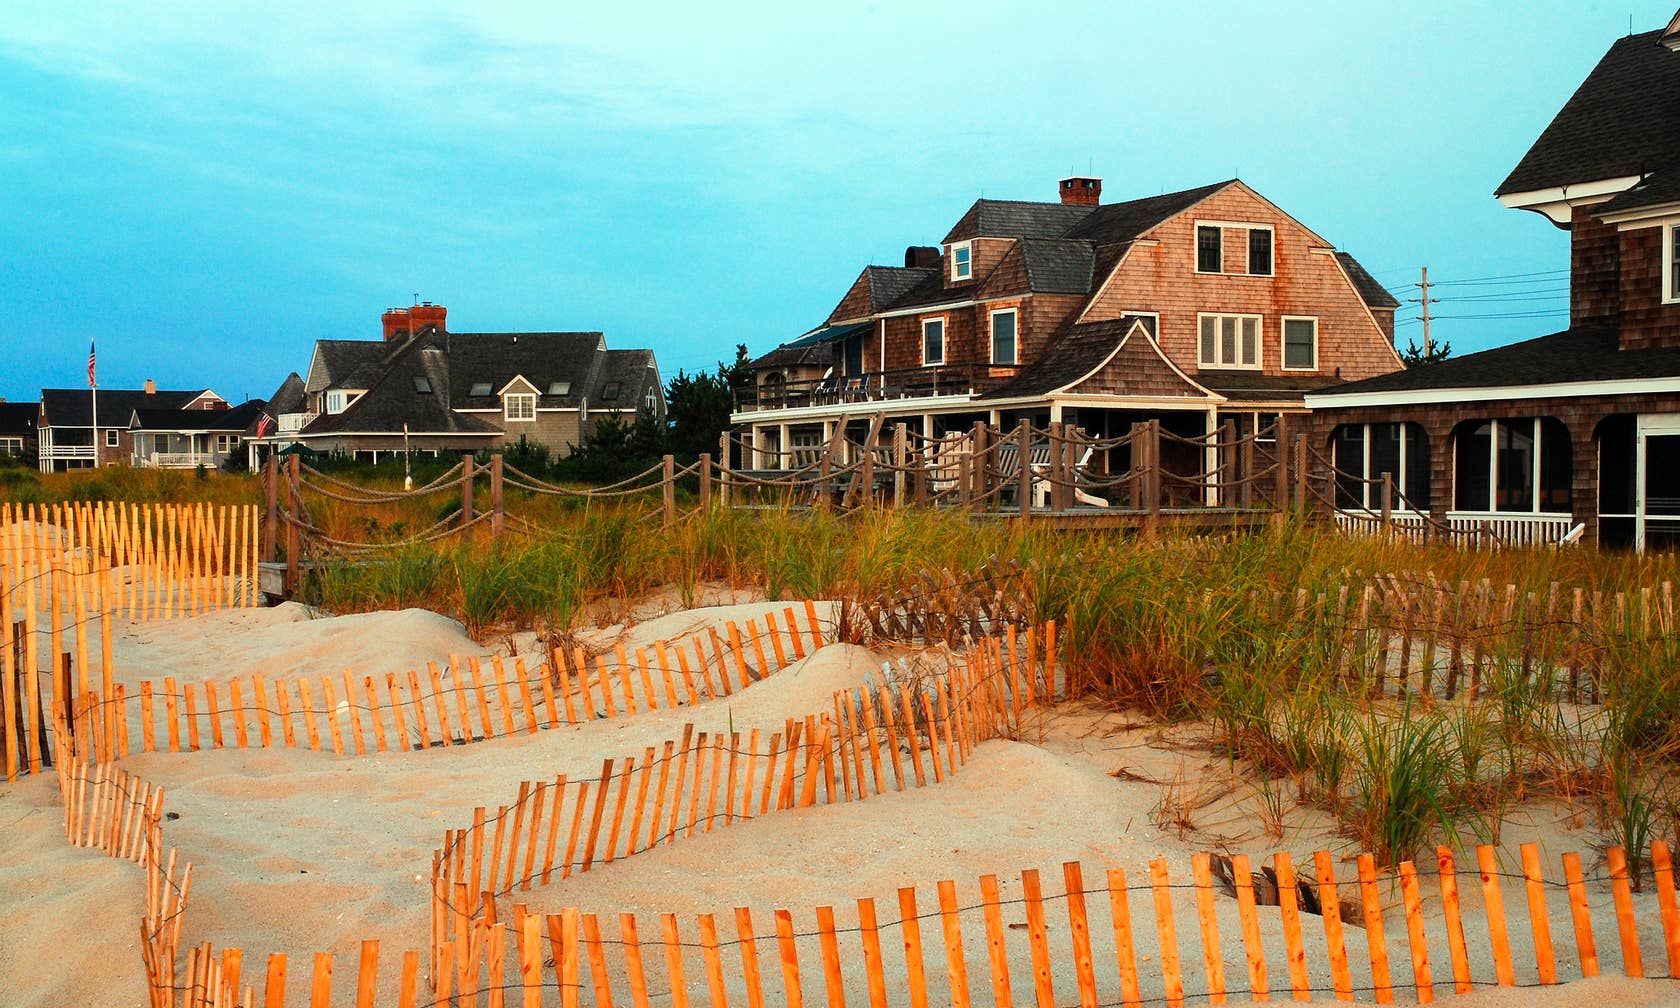 Holiday rentals in Jersey Shore